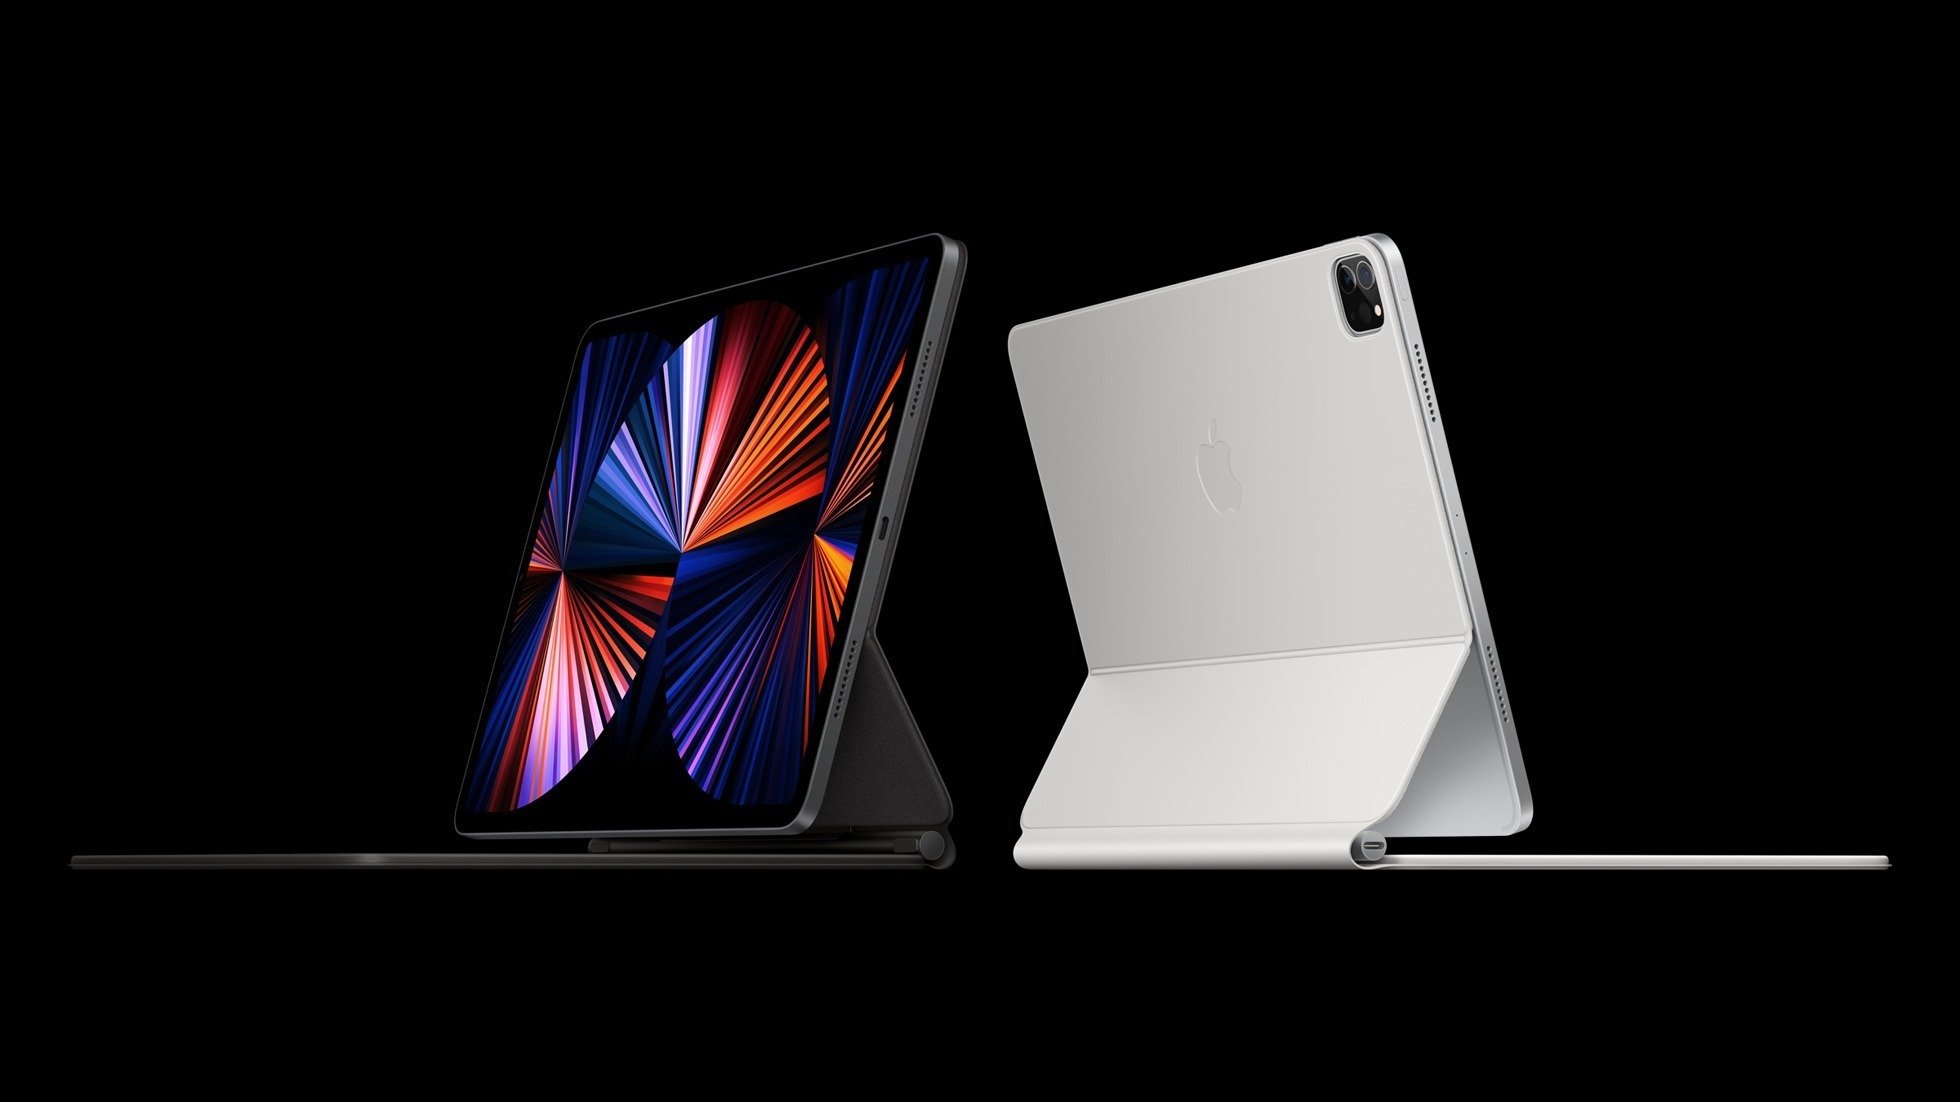 two apple ipad pros in desktop mode amidst a black background